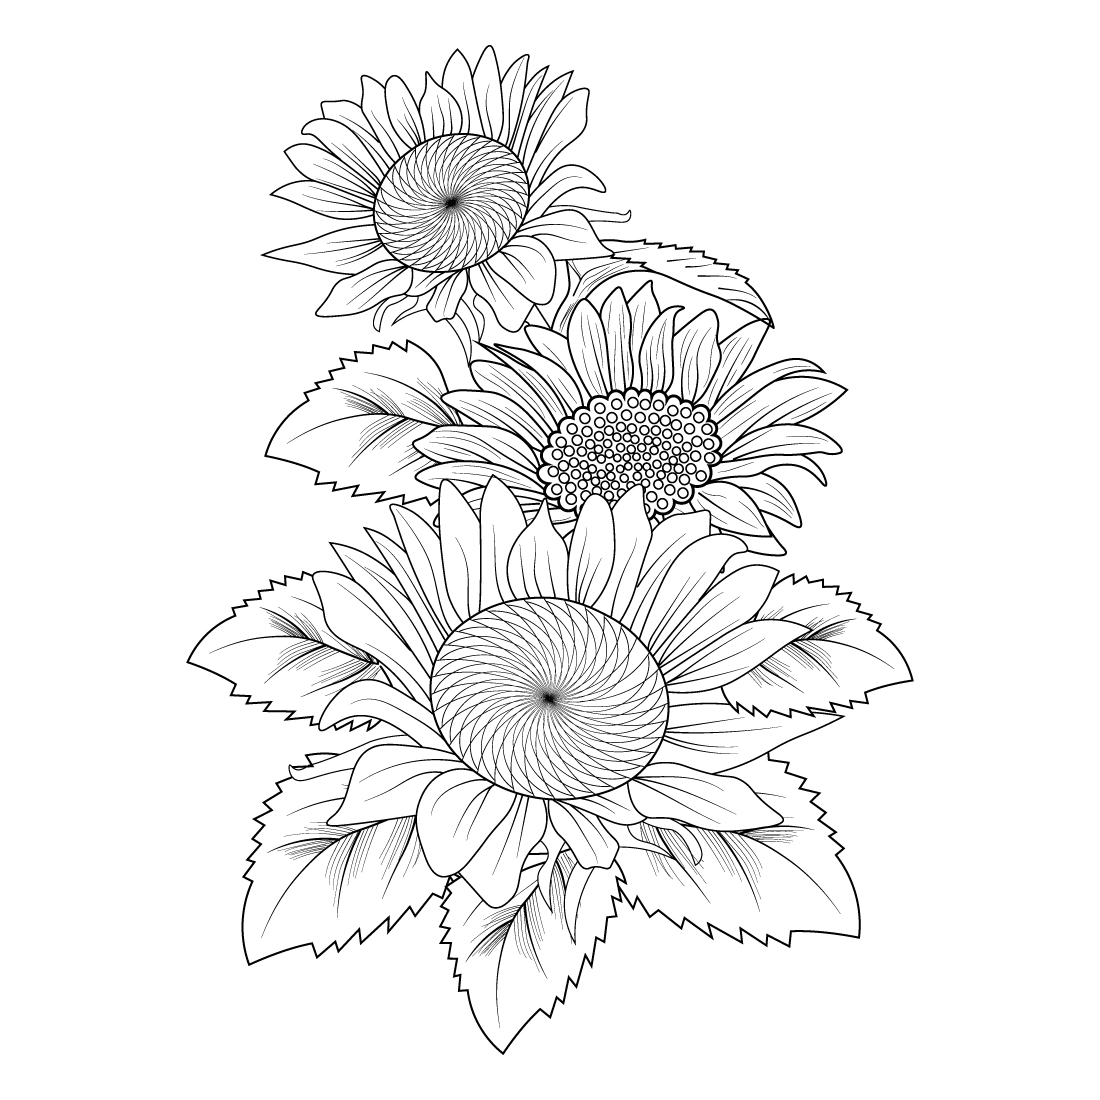 Sunflower Drawing - How To Draw A Sunflower Step By Step!